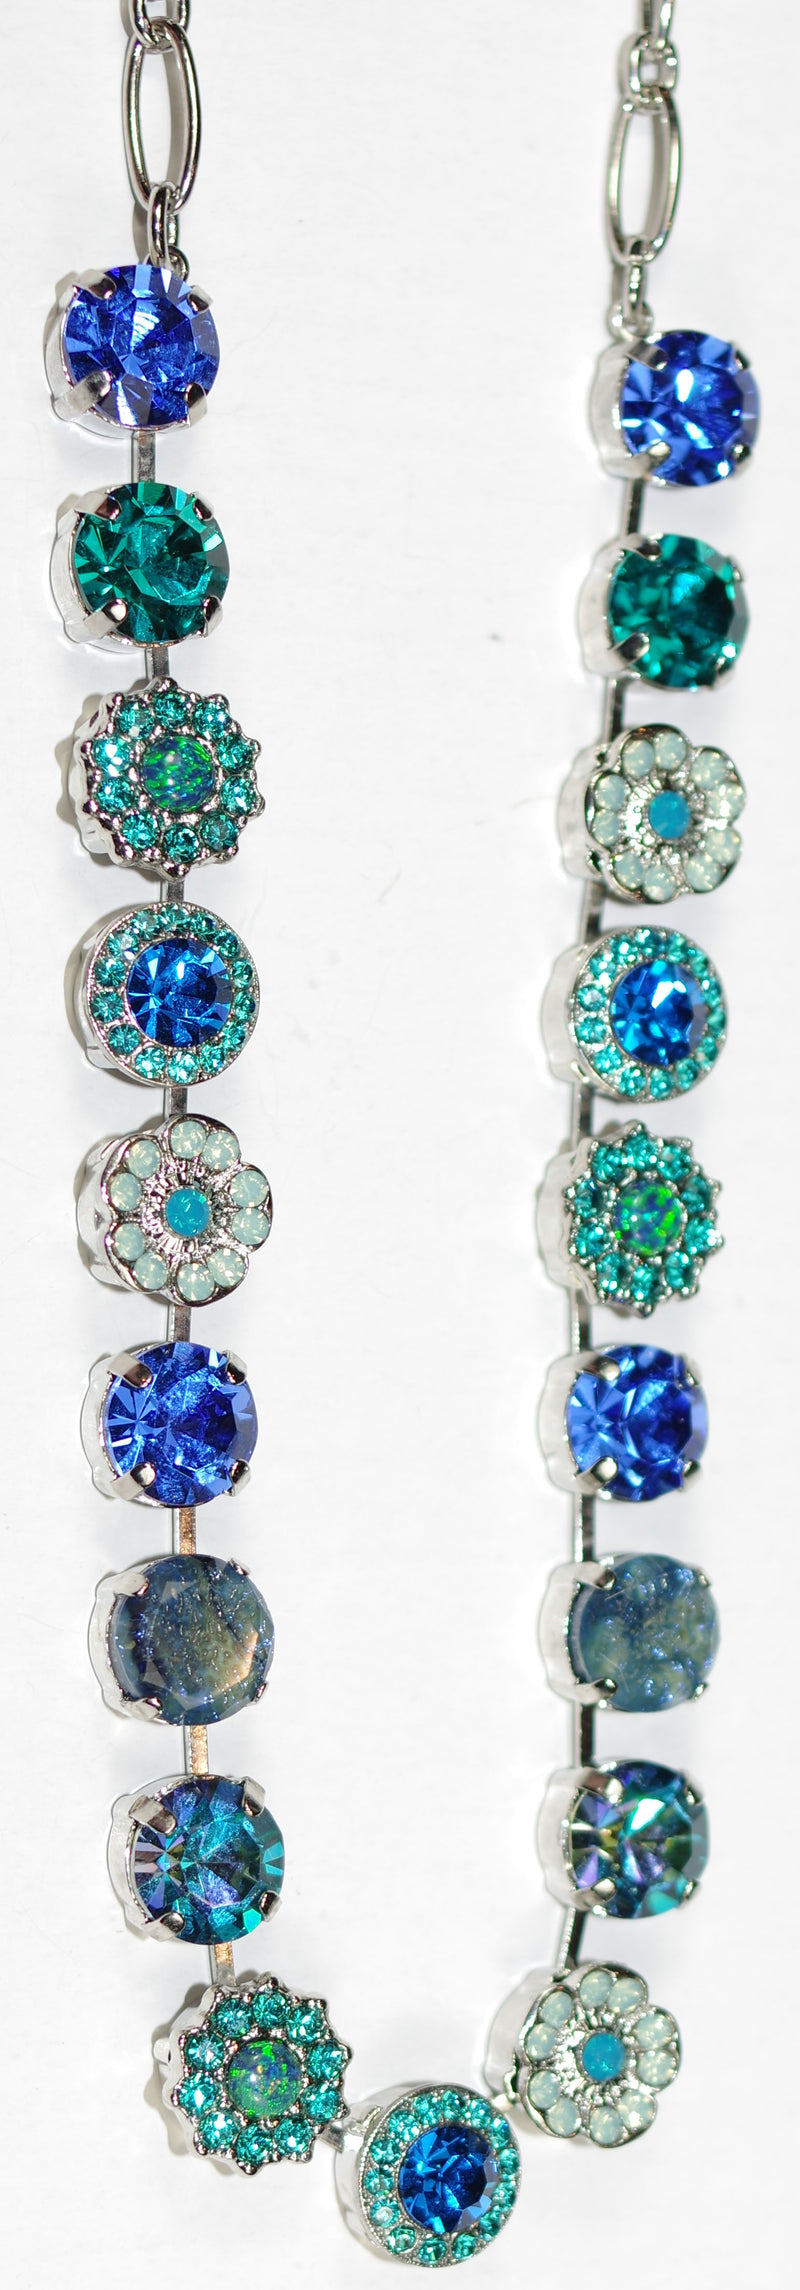 MARIANA NECKLACE SERENITY: blue, teal, pacific opal stones in 18" silver rhodium adjustable chain